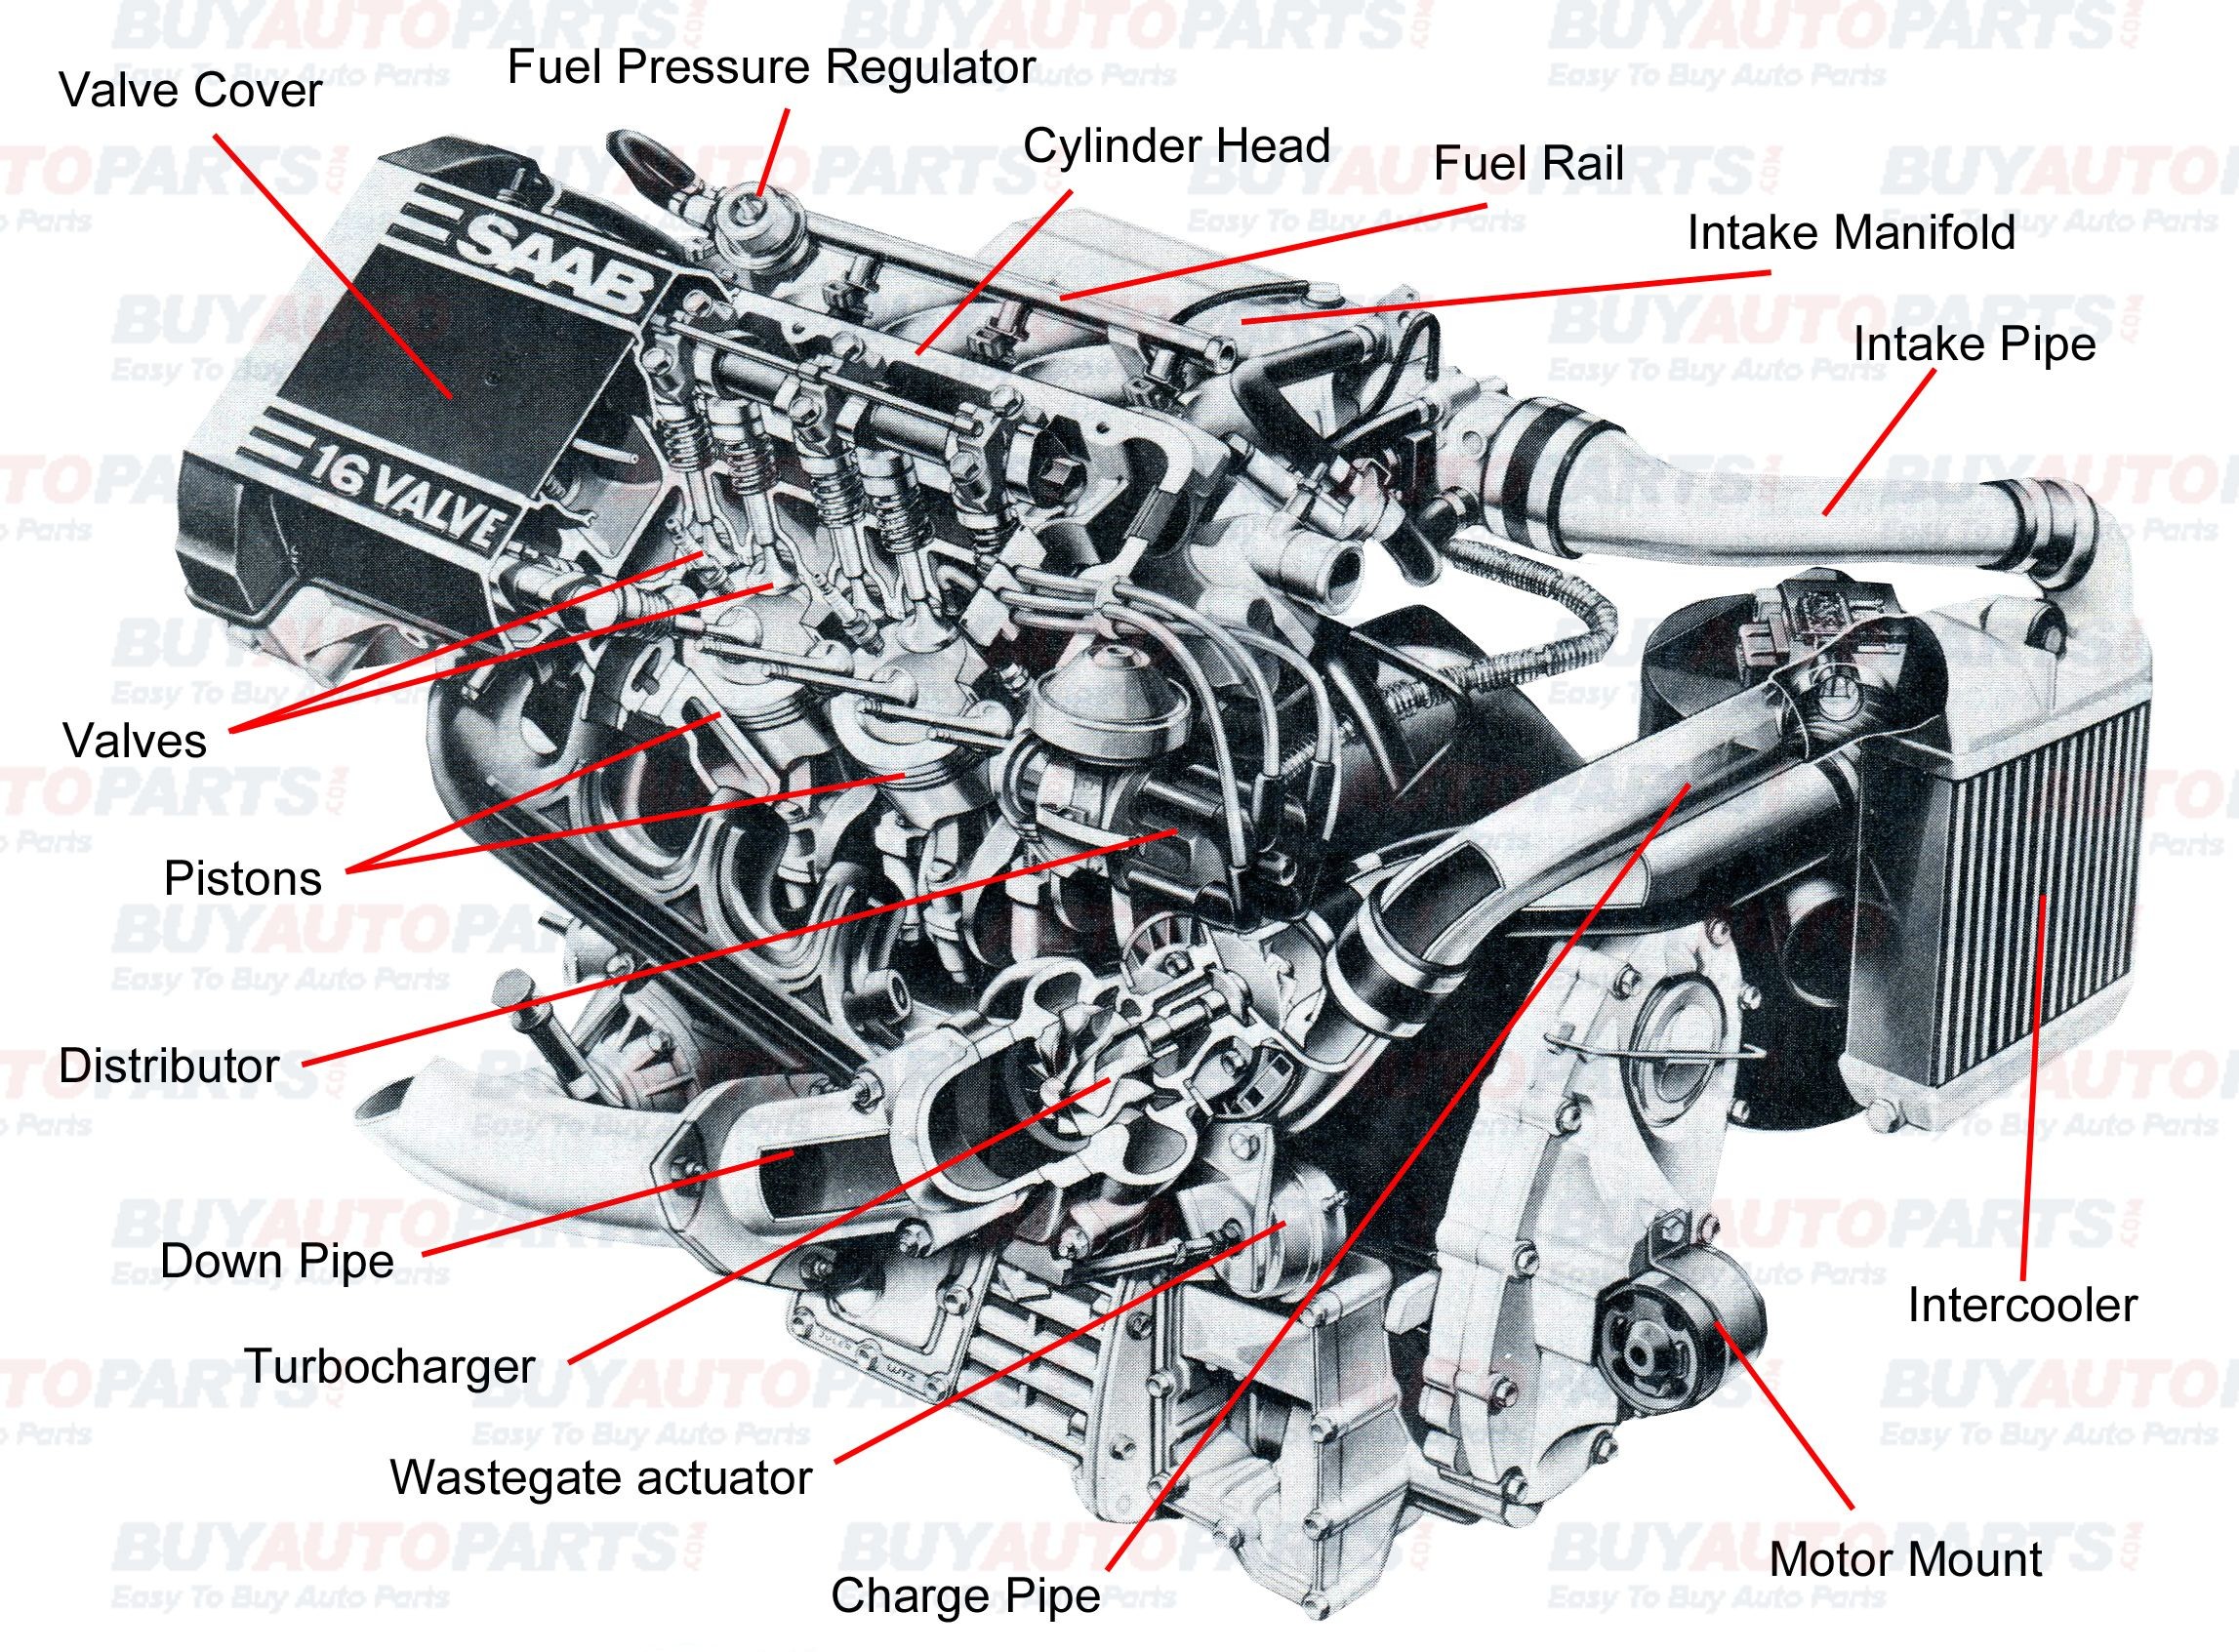 Car Parts Diagram Names All Internal Bustion Engines Have the Same Basic Ponents the